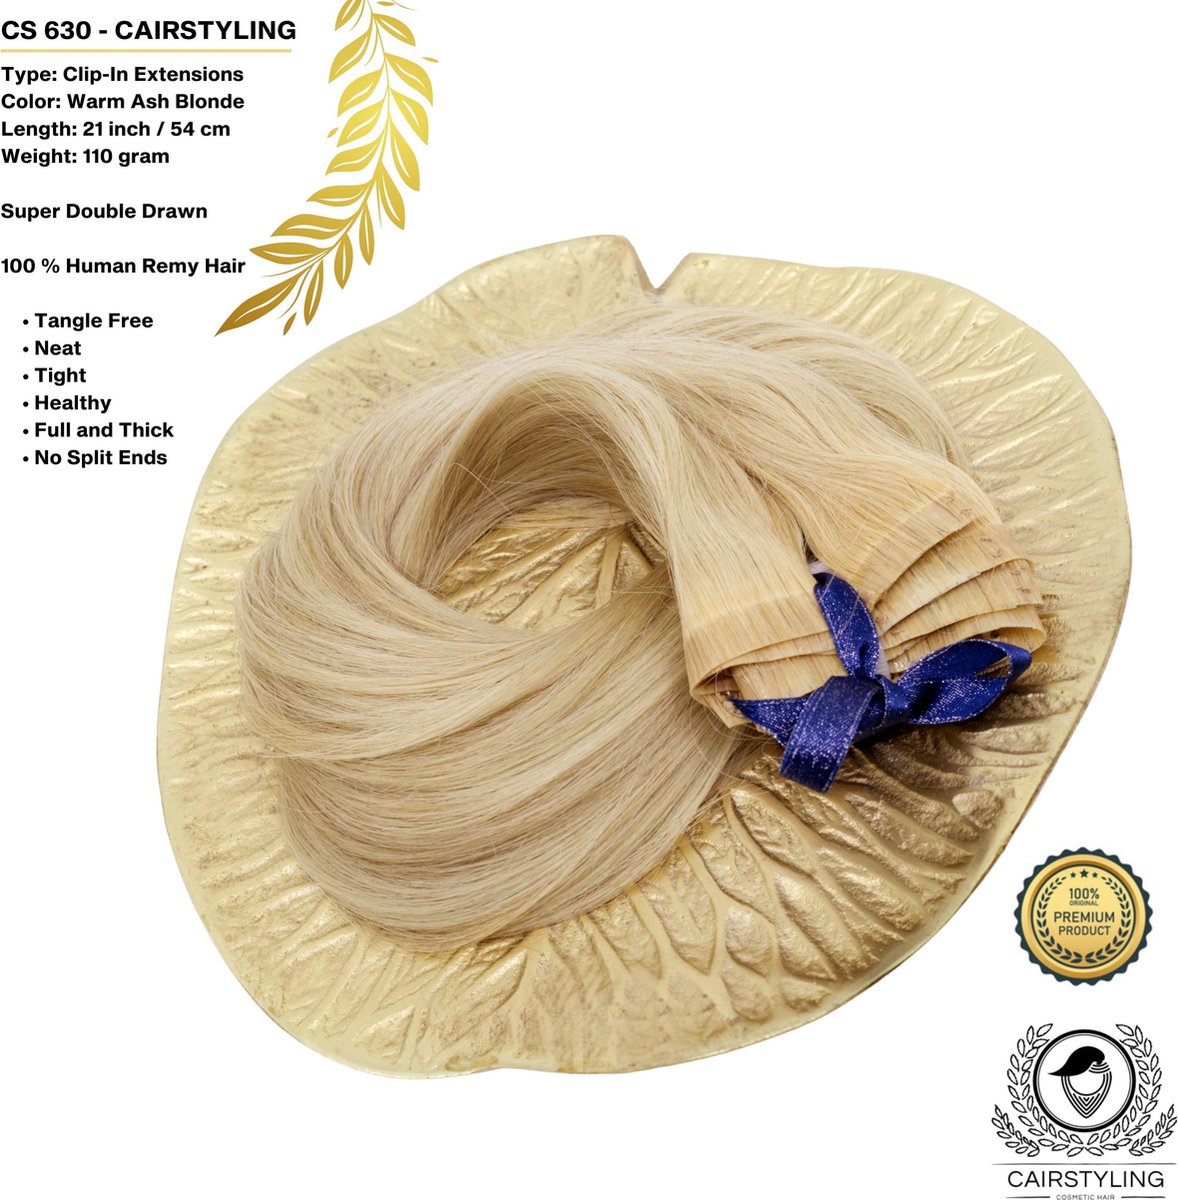 CAIRSTYLING Premium 100% Human Hair - CS630 INVISIBLE CLIP-IN - Super Double Remy Human Hair Extensions | 110 Gram | 54 CM (21 inch) | Haarverlenging | Best Quality Hair Long-term Use | 2022 Trending Invisible Laces | Cool Golden Blonde